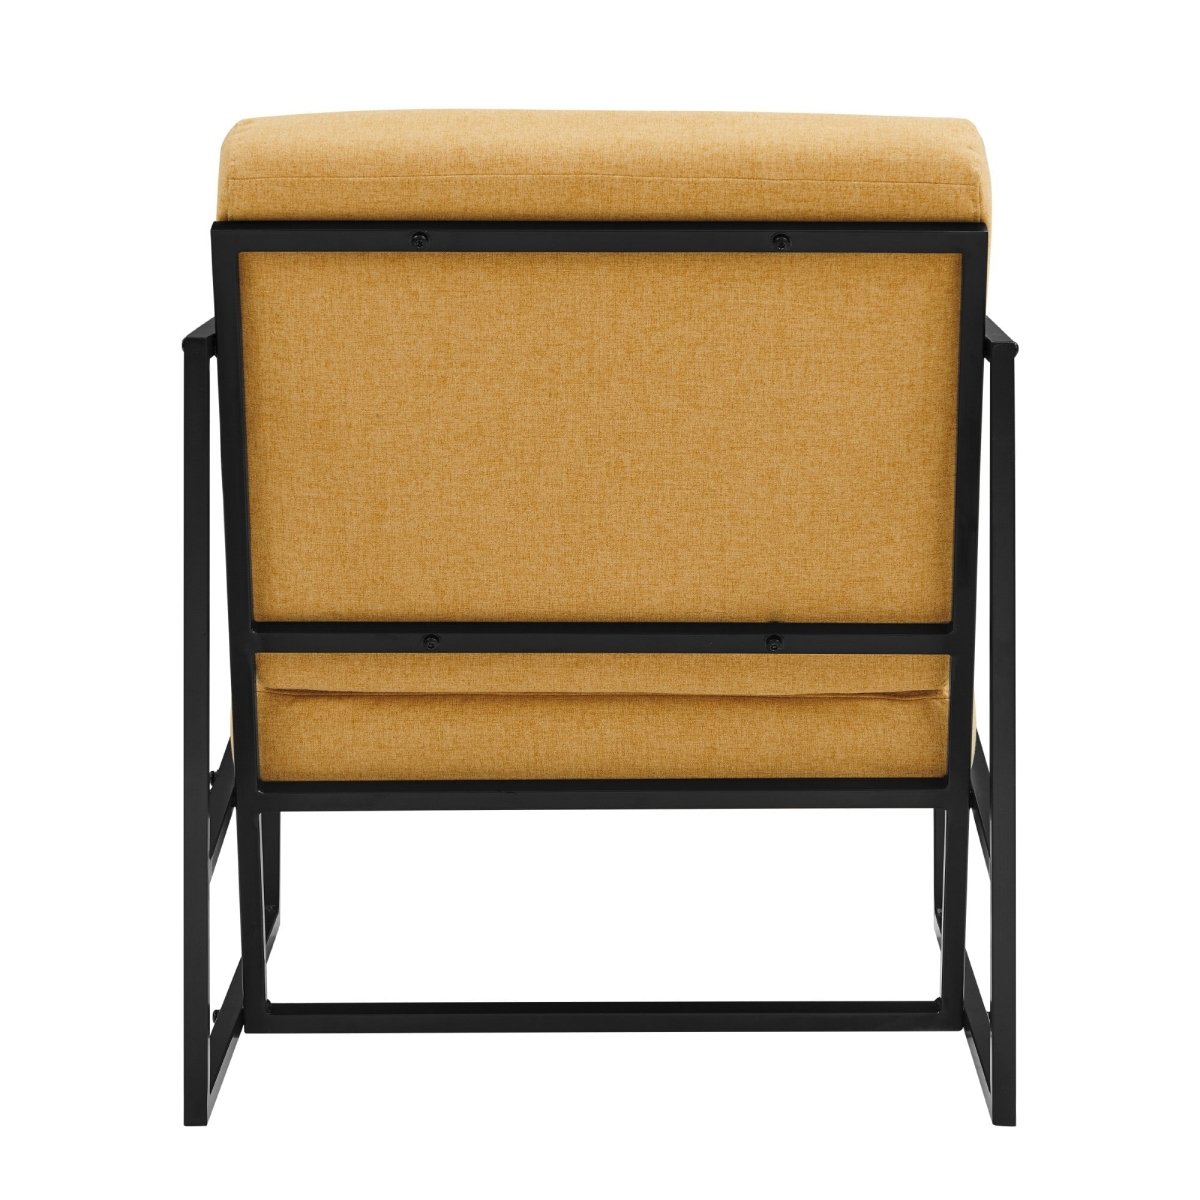 Walker Edison Mid-Century Modern Square Frame Fabric Lounge Chair - lily & onyx